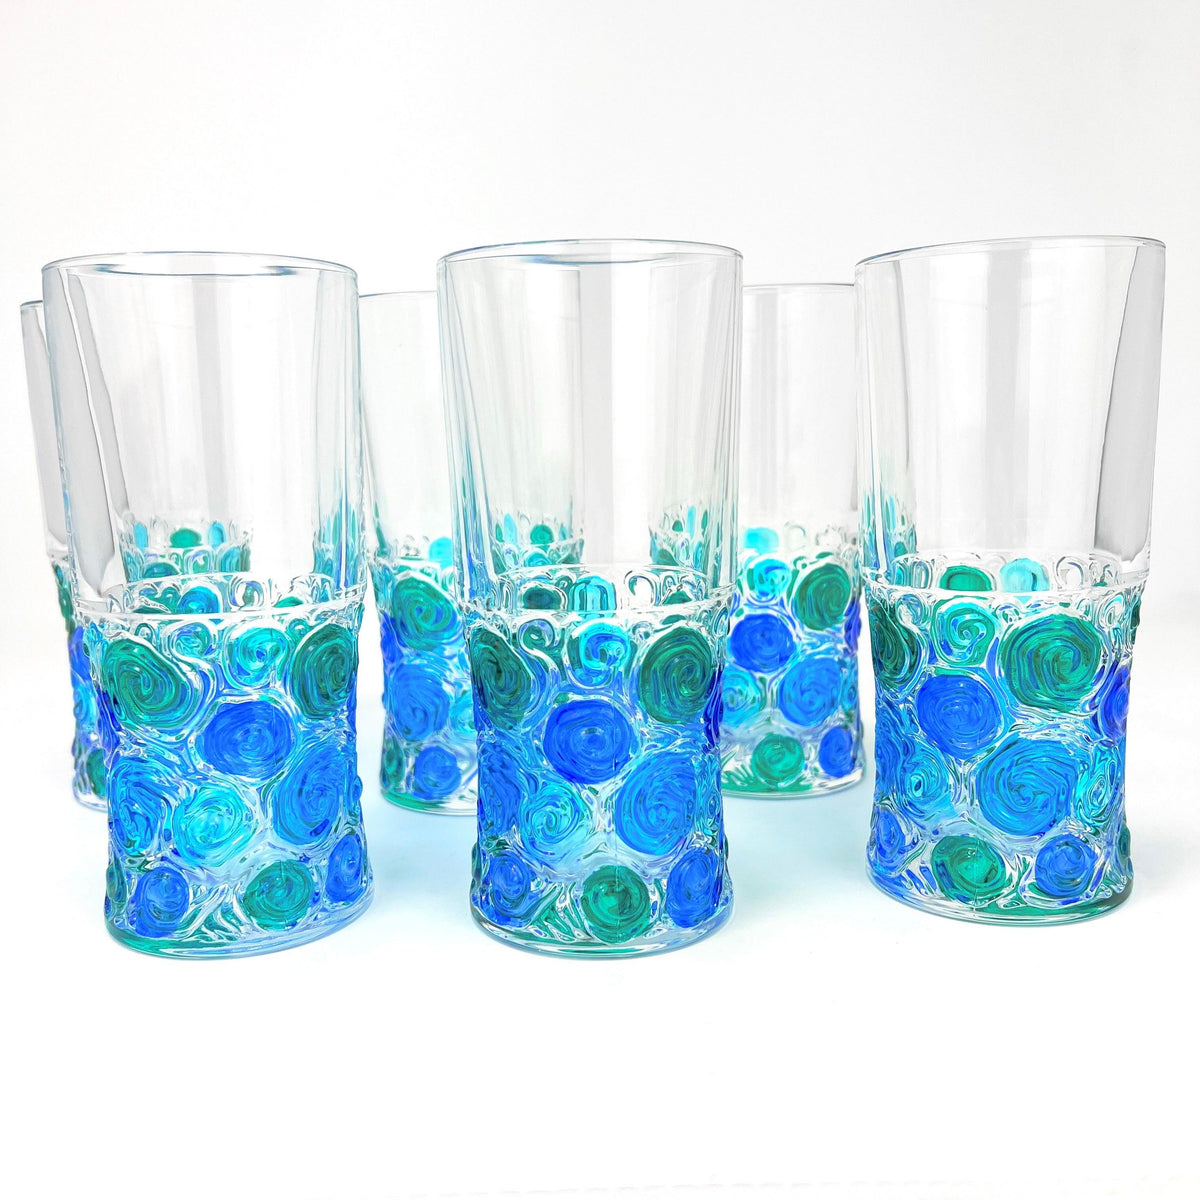 Side view of six Italian Crystal tall drinking glasses with bright blue, green, and turquoise swirls of color on the bottom half.